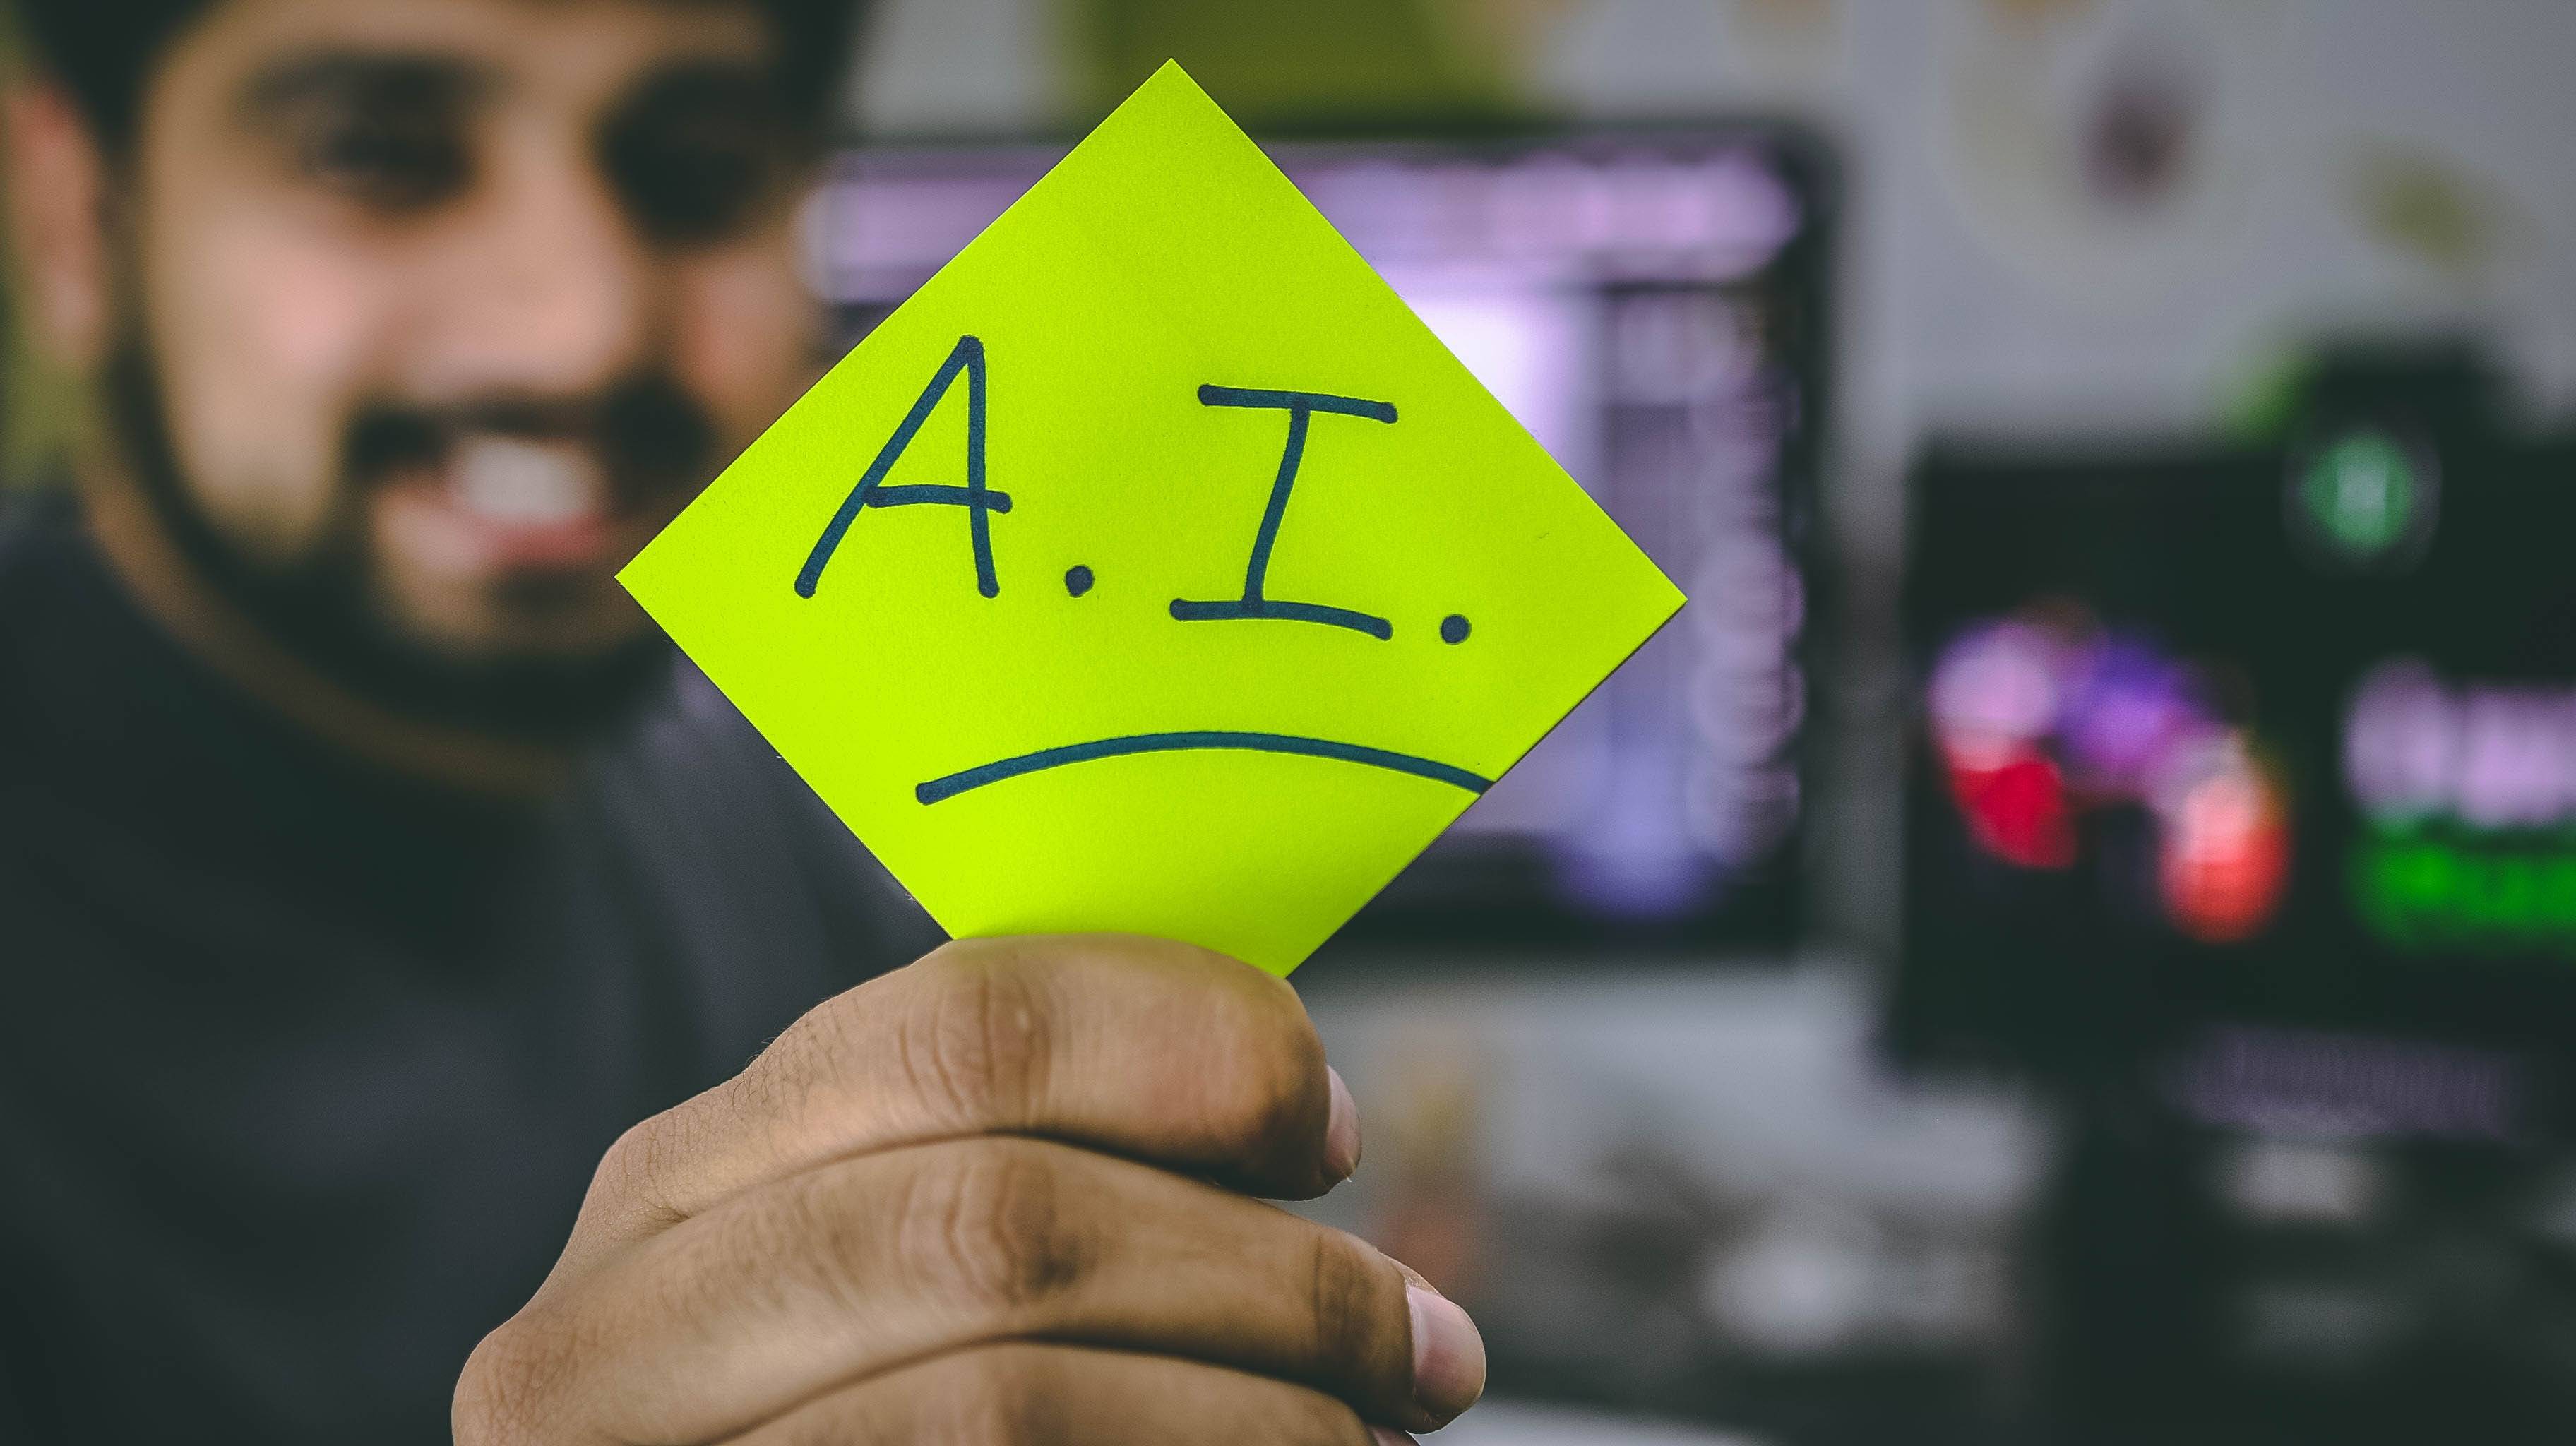 Man holding a post it note that says "A.I"